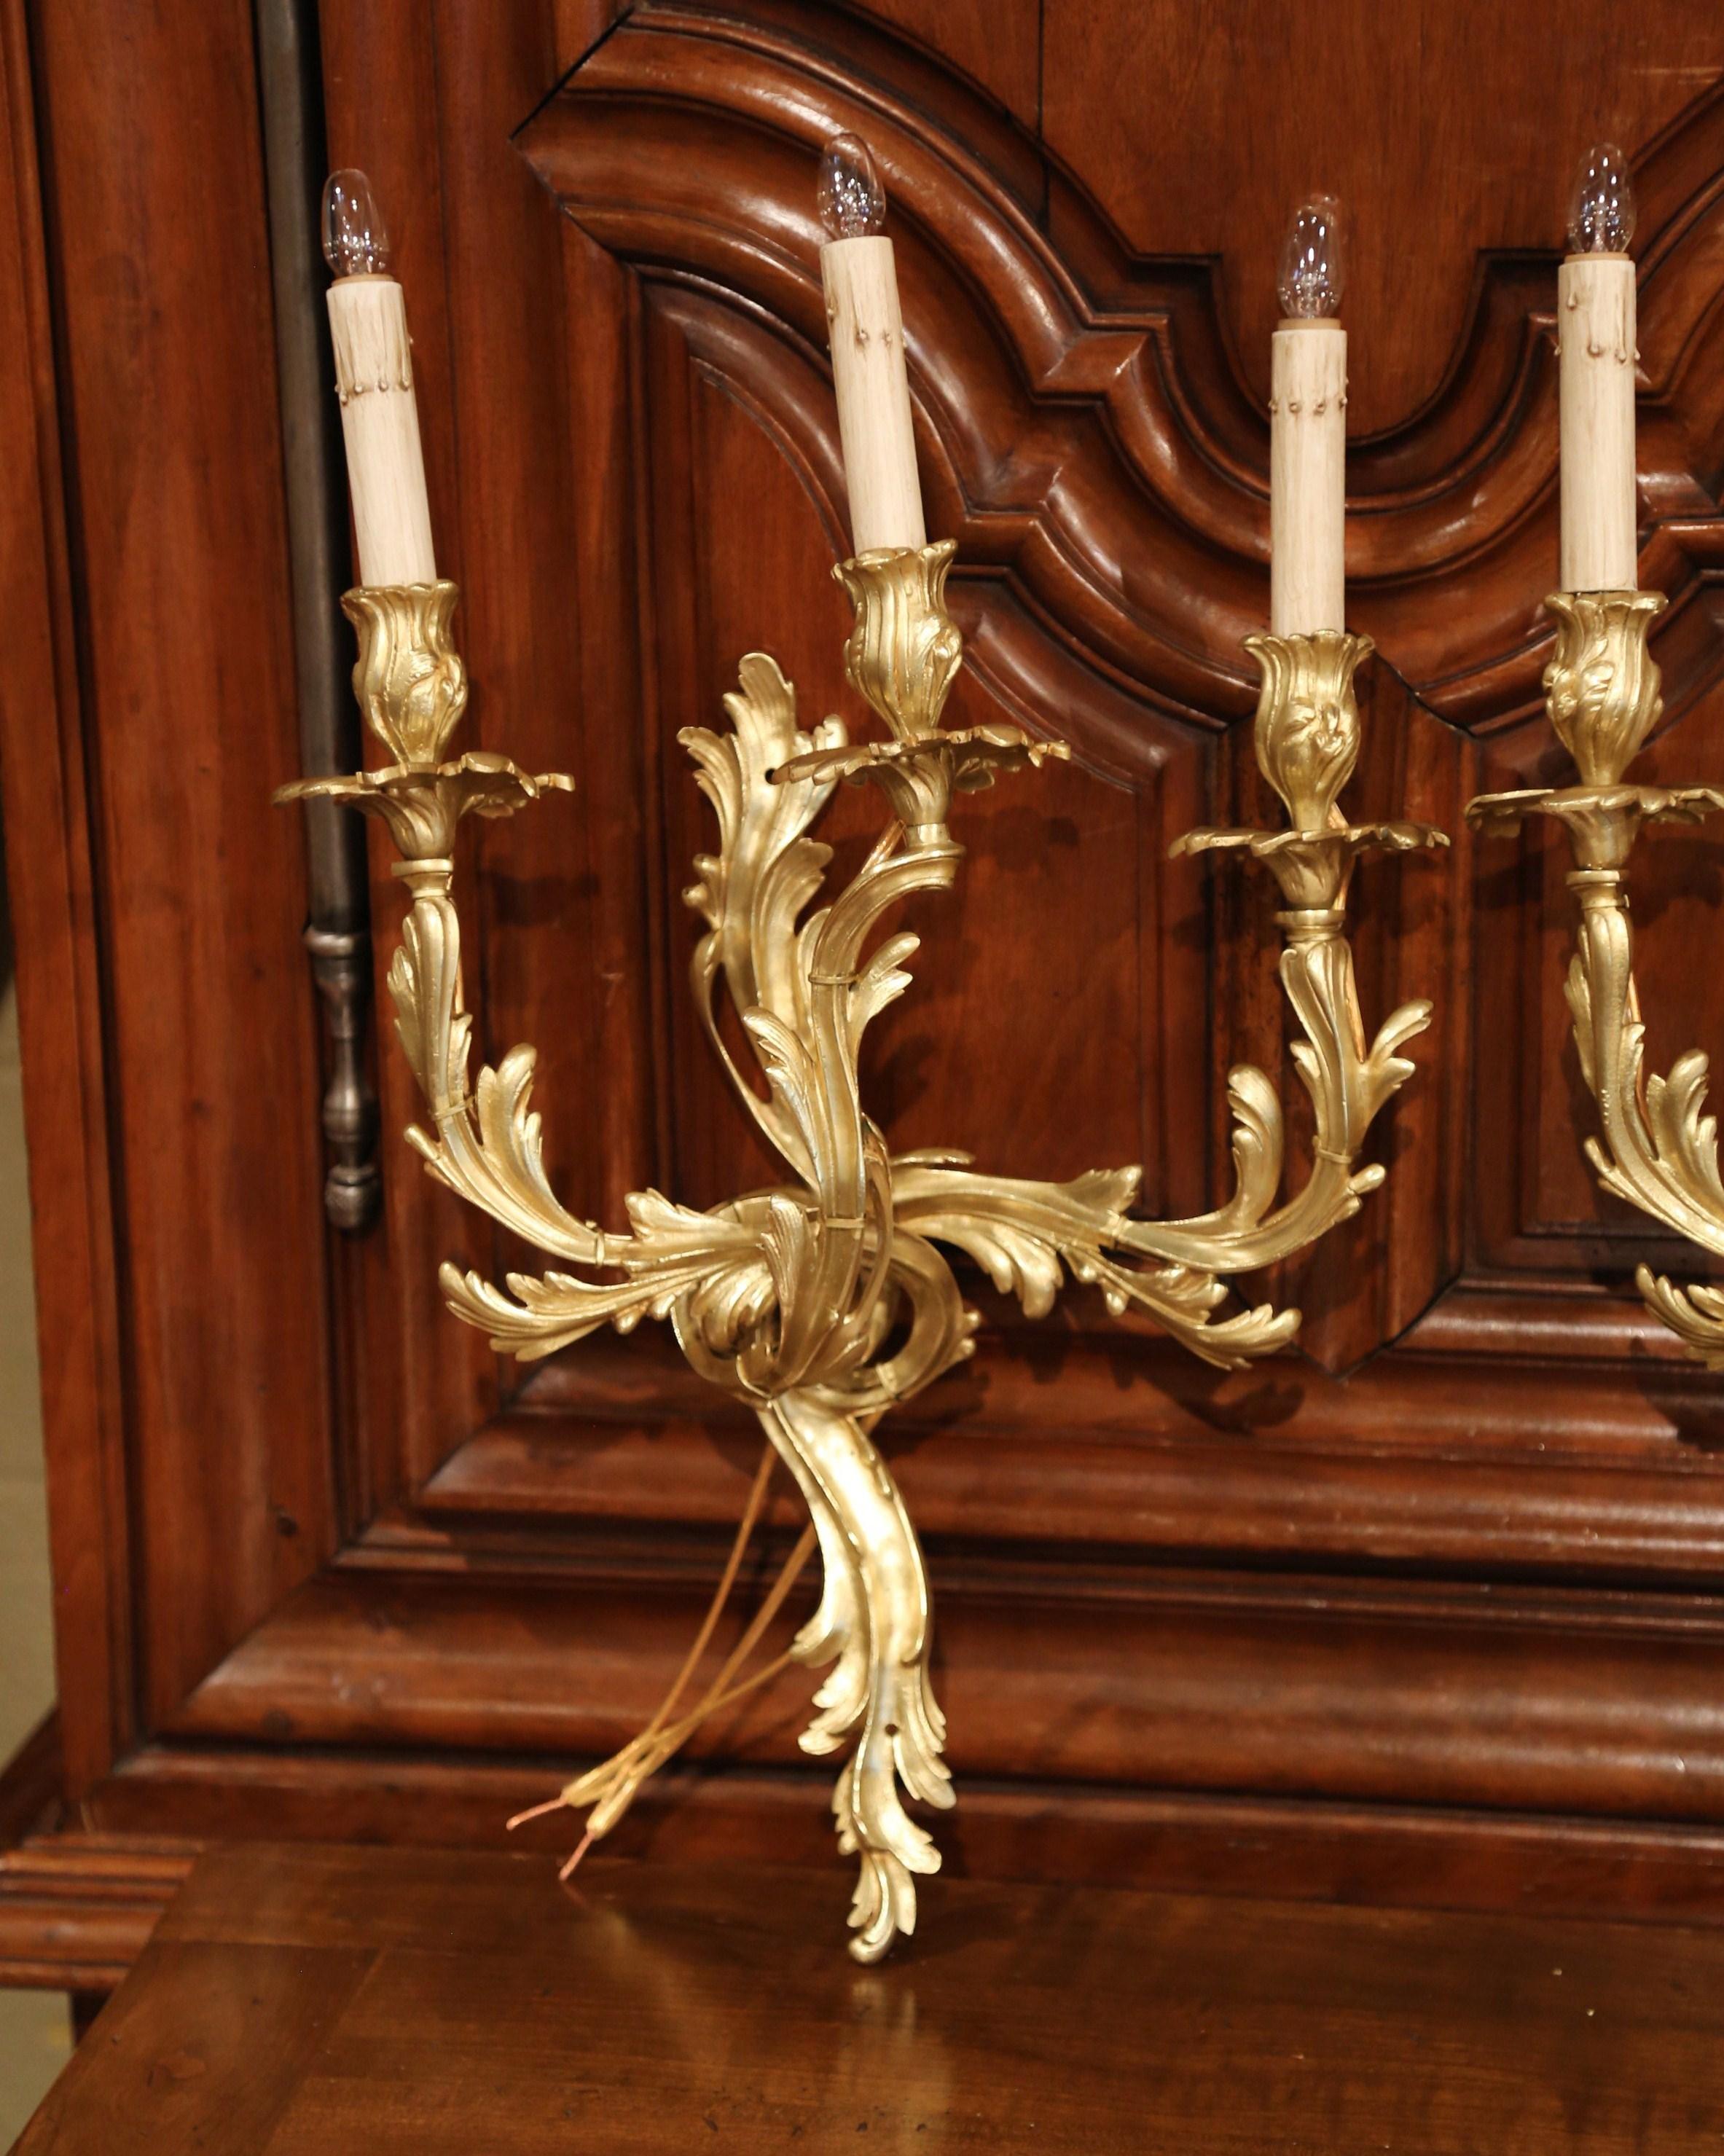 This elegant pair of antique bronze sconces was crafted in France, circa 1920. Each of the ornate sconces has three lights newly wired and features scroll design with decorative foliage decor. The delicate, traditional light fixtures are in